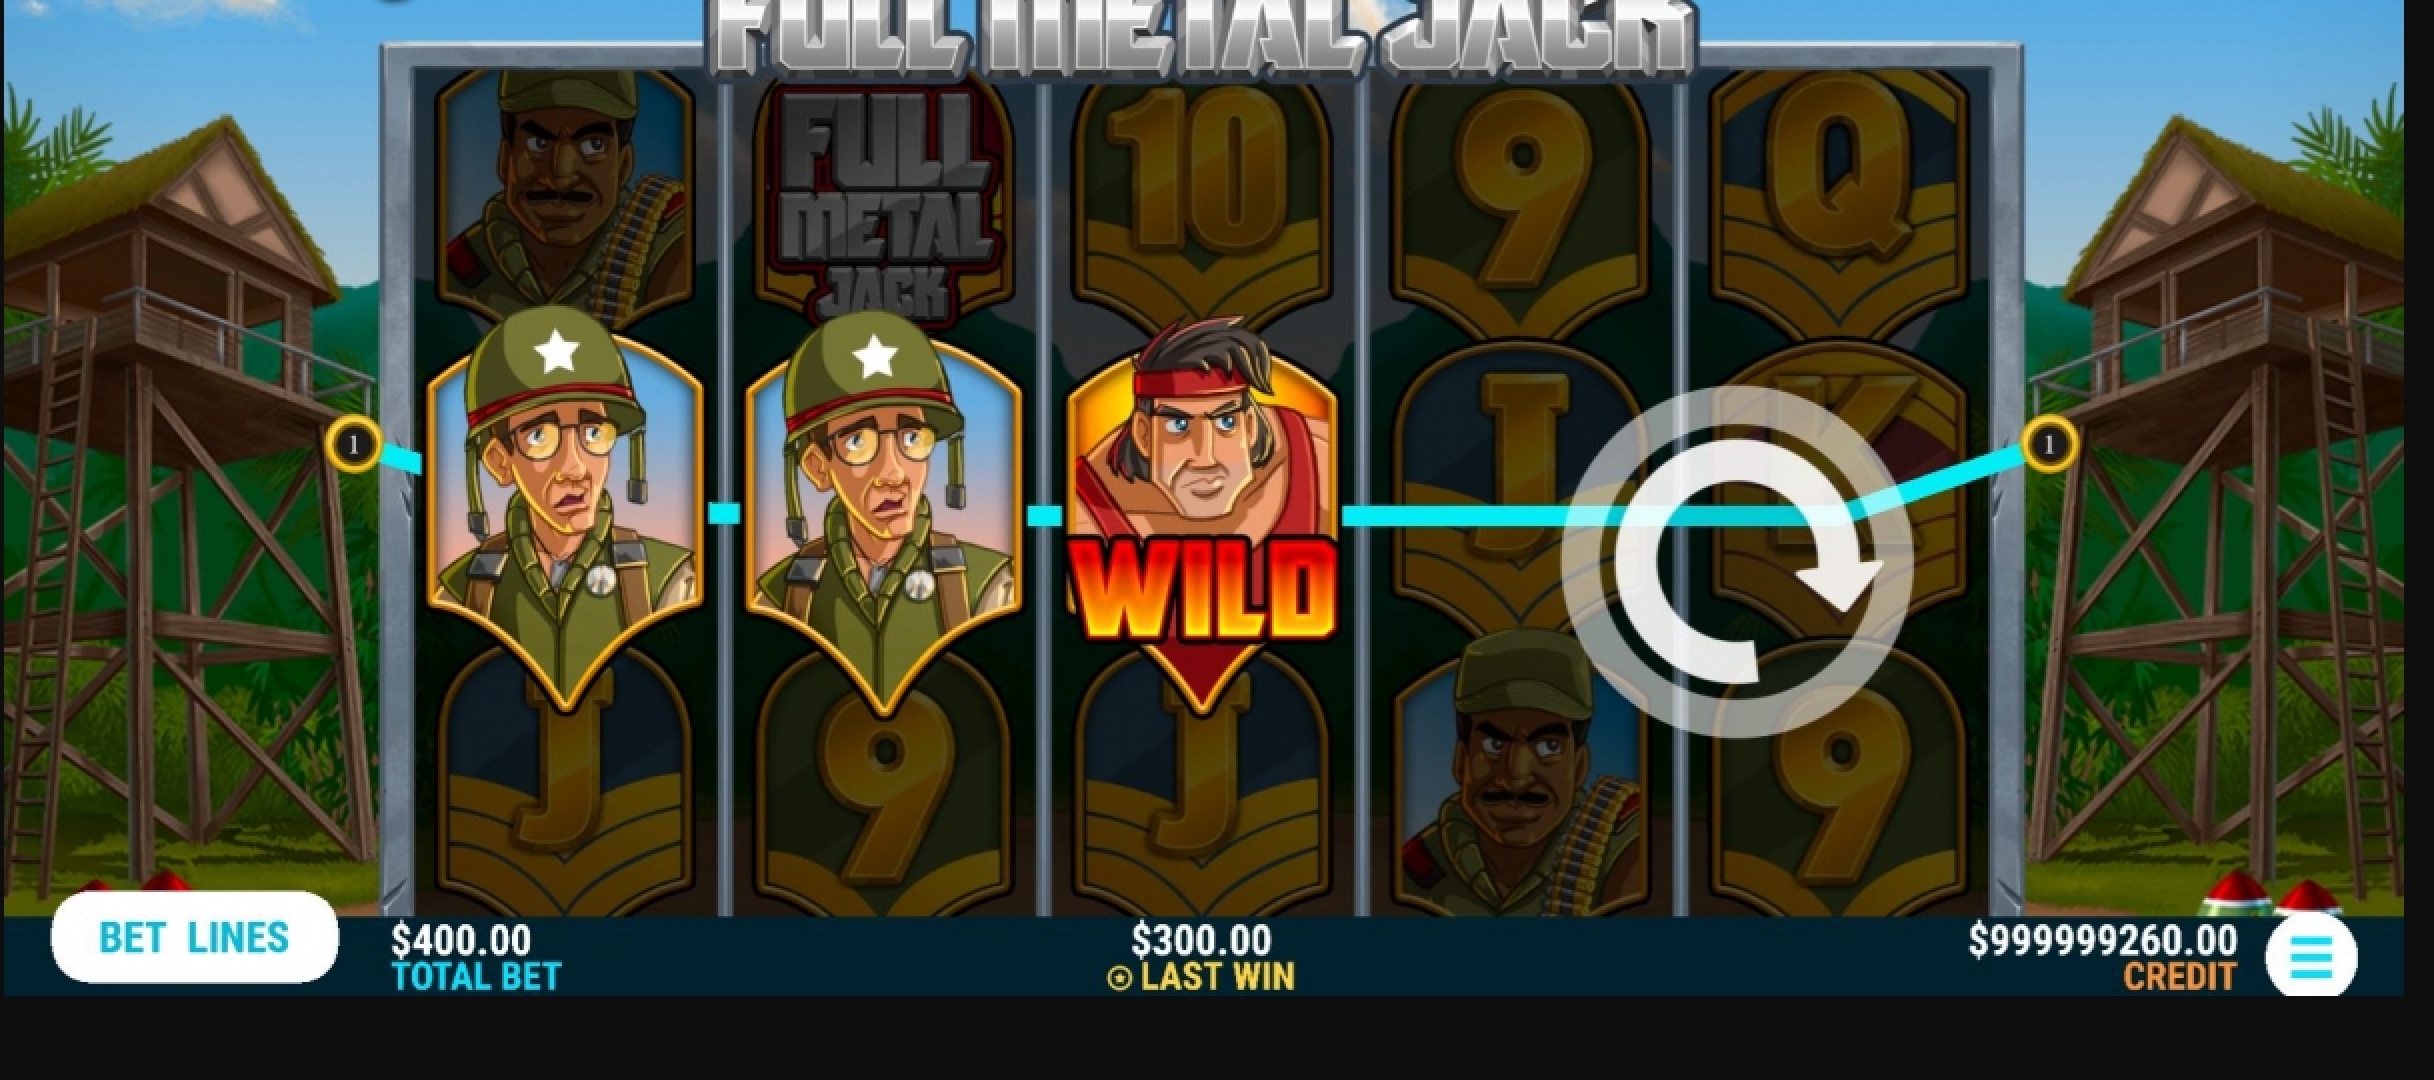 The Full Metal Jack Online Slot Demo Game by Slot Factory